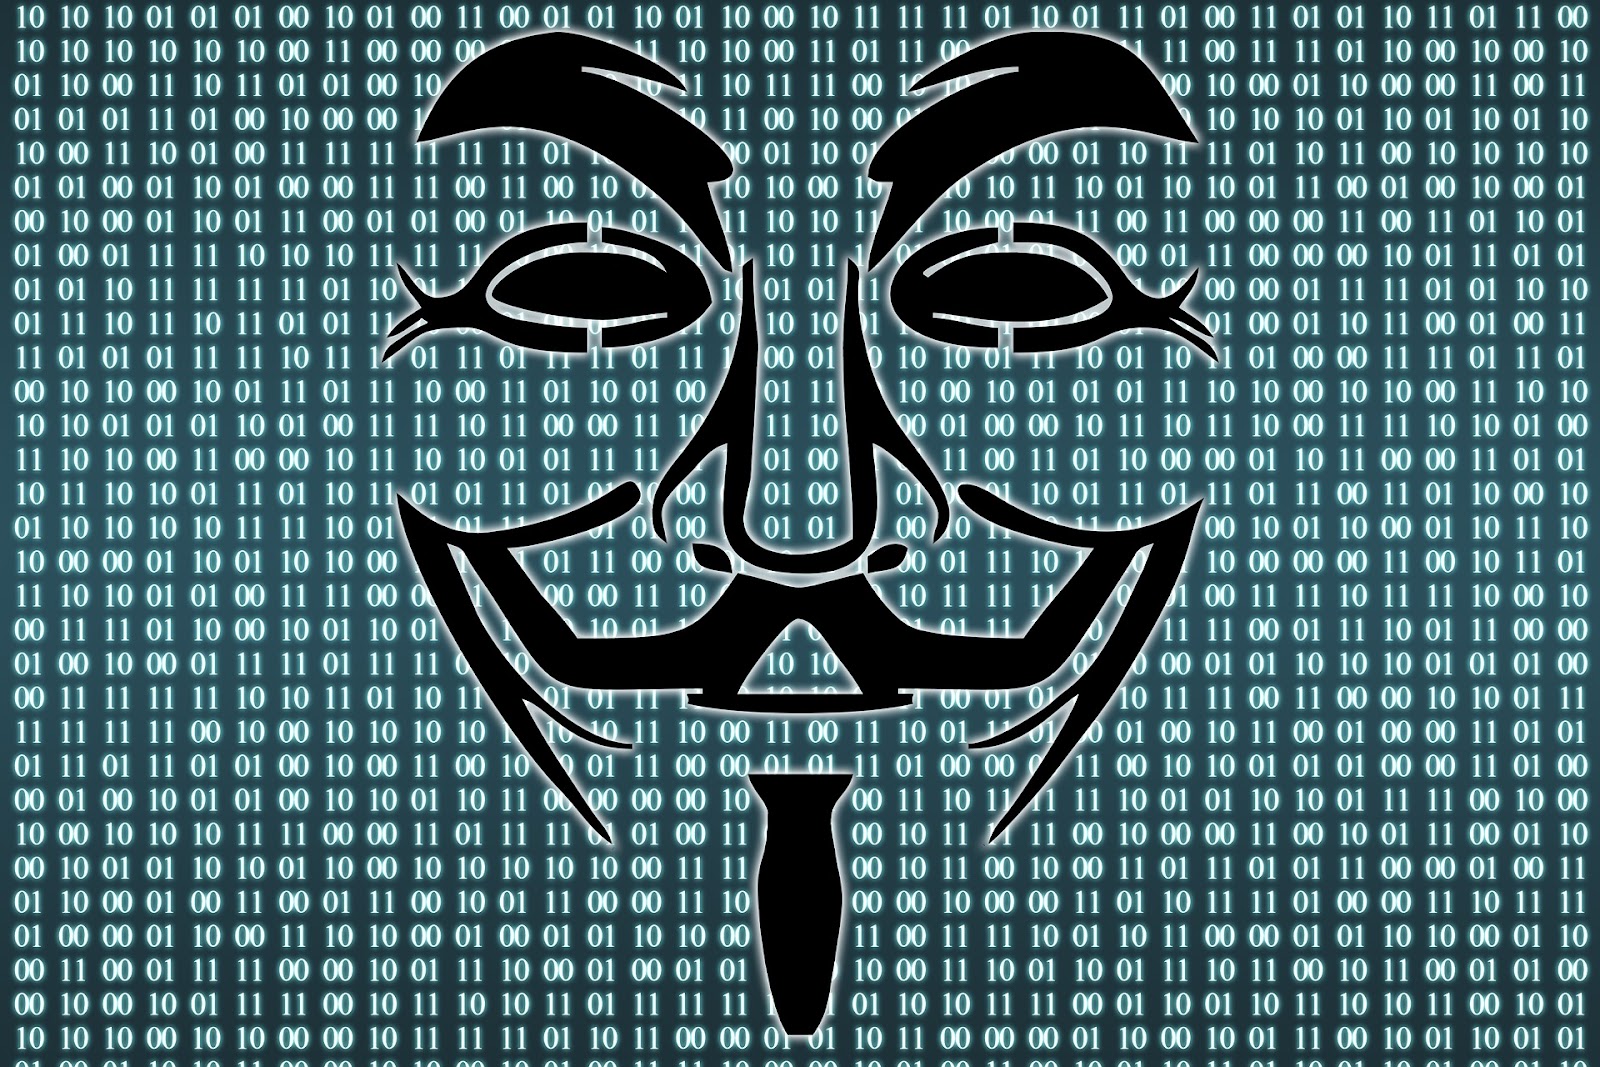 GCHQ's JTRIG targeted hacking group Anonymous